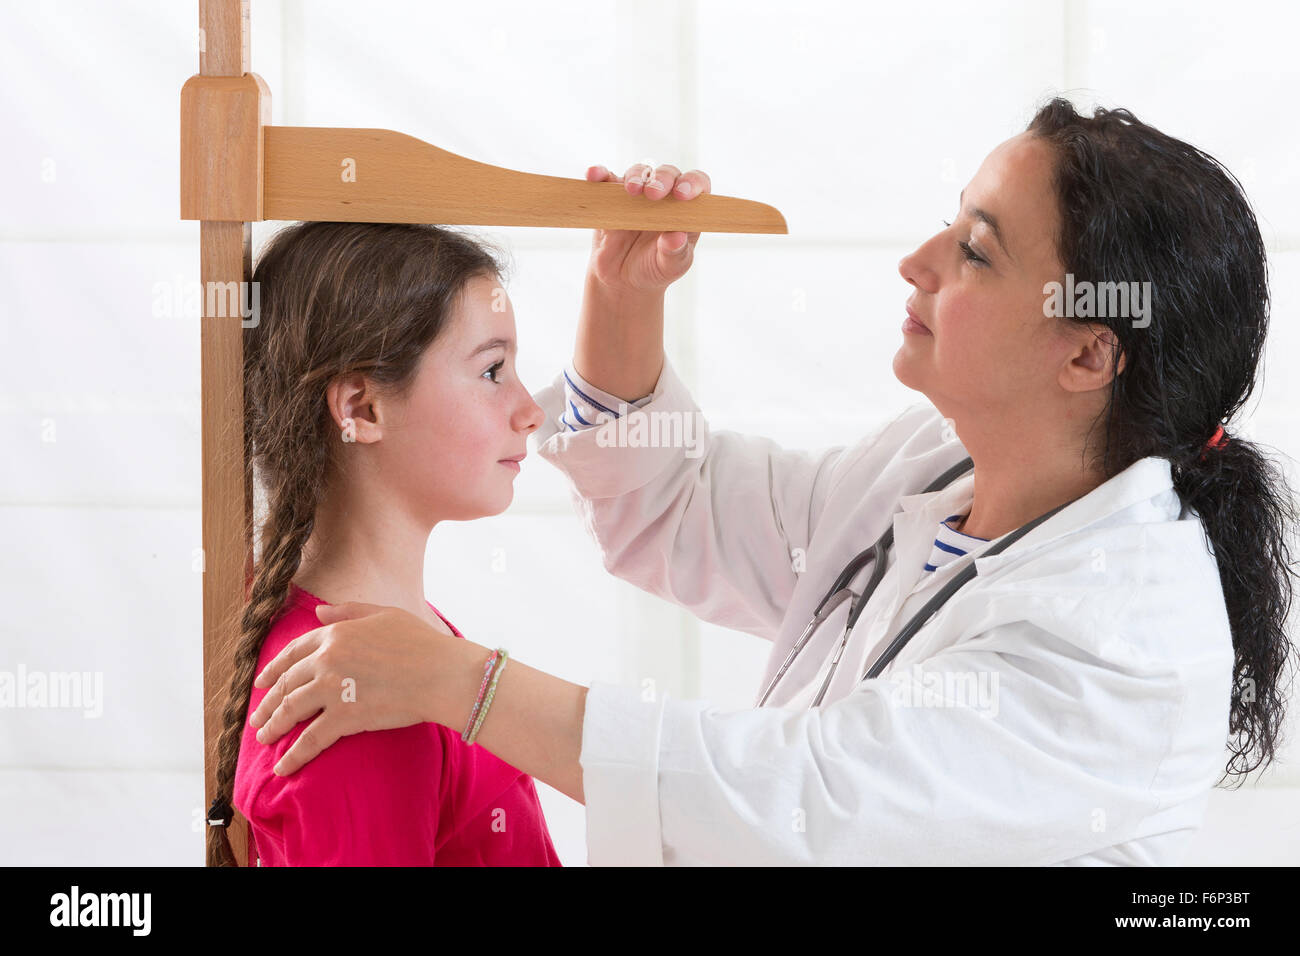 Doctor Measurement The Girl Stature Stock Photo Alamy